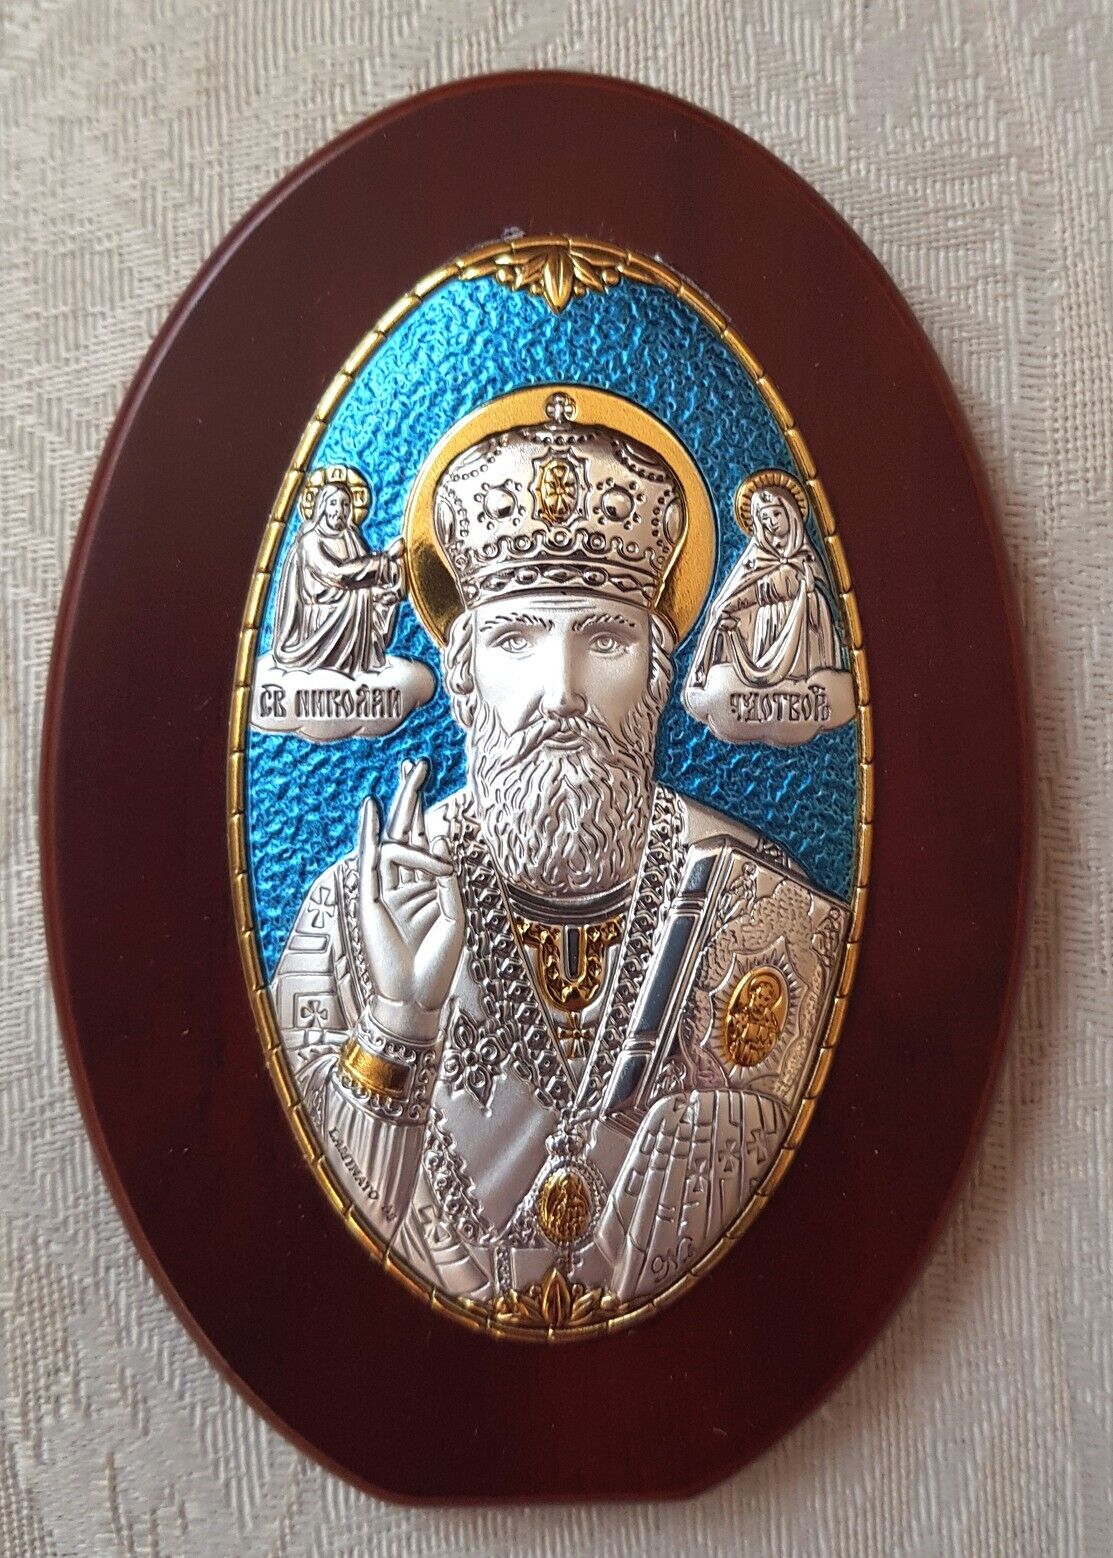 * ITALY - from BARI * St NICOLAS ** SILVER ** HOLY * ICON ** RUSSIAN, GREEK * g3